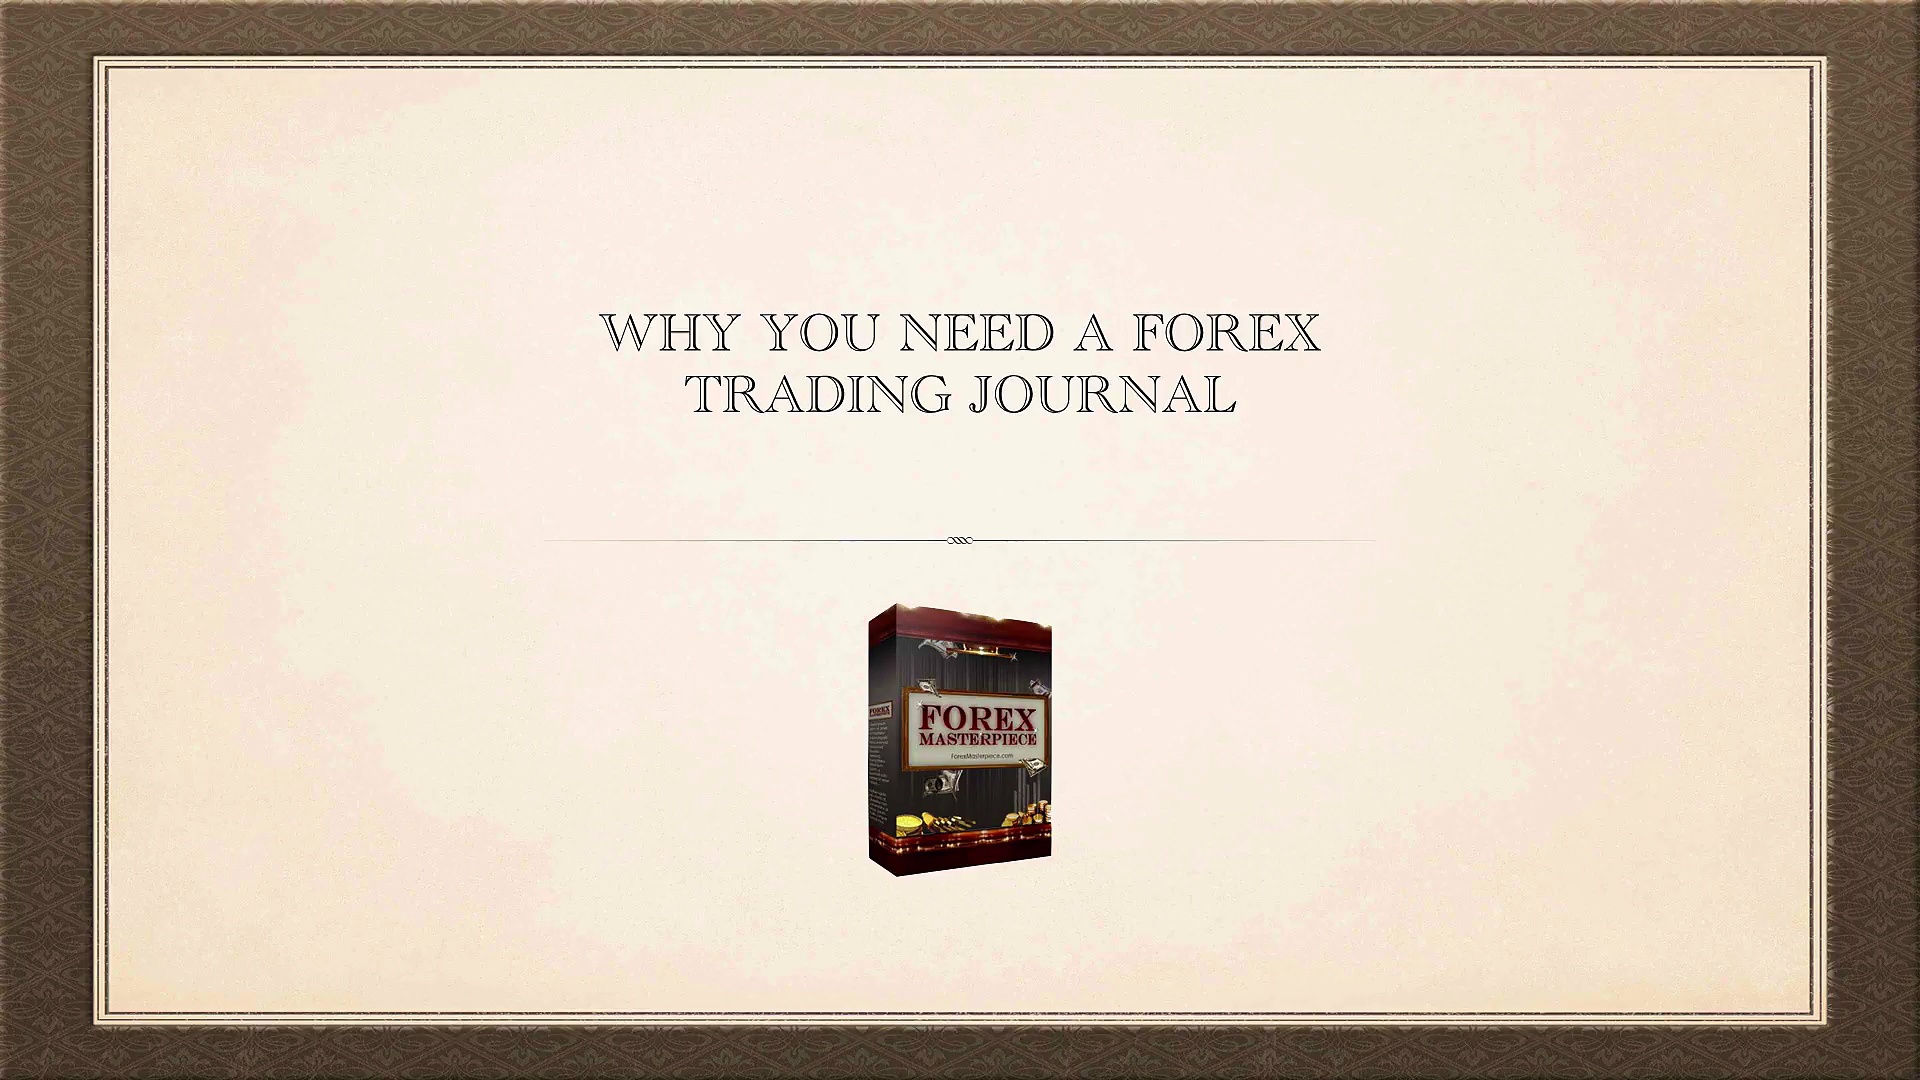 Why Do You Need A Forex Trading Journal?